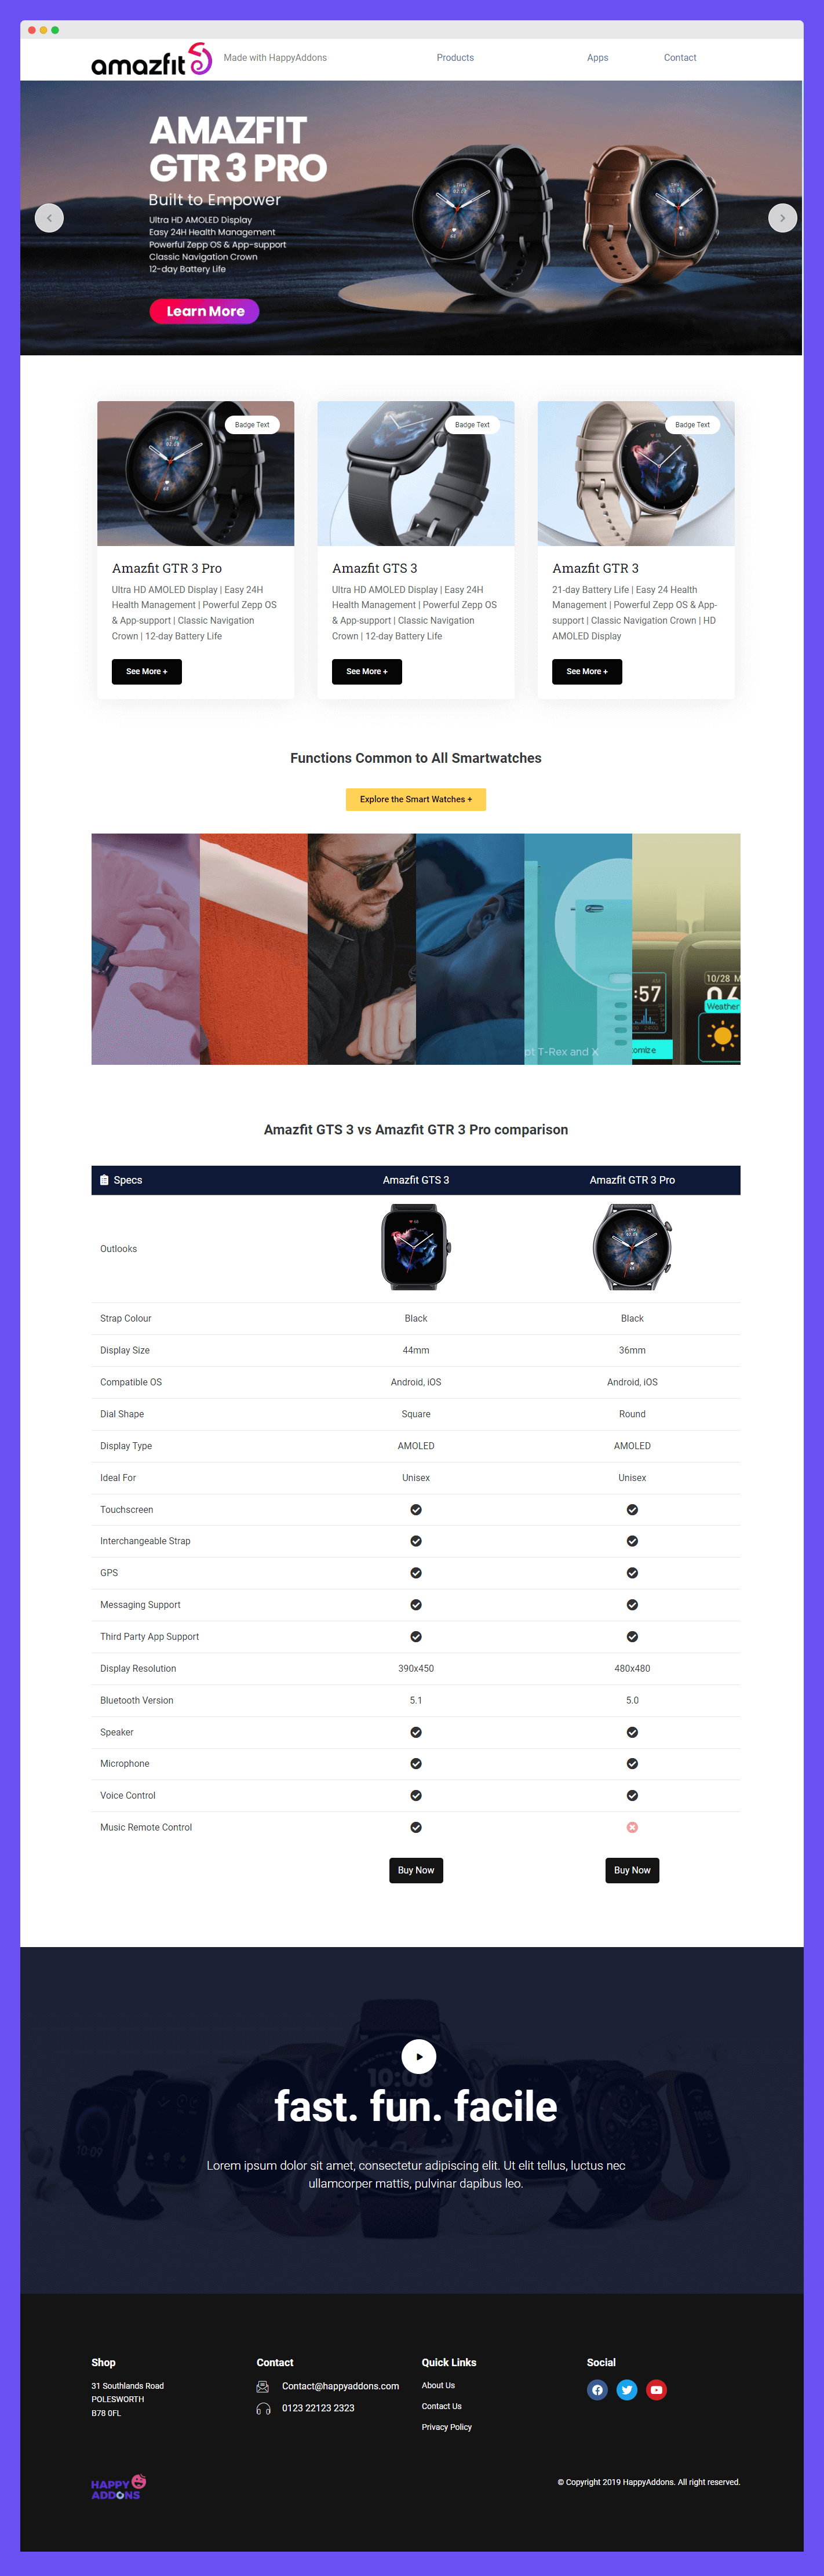 Product Page with Comparison Table